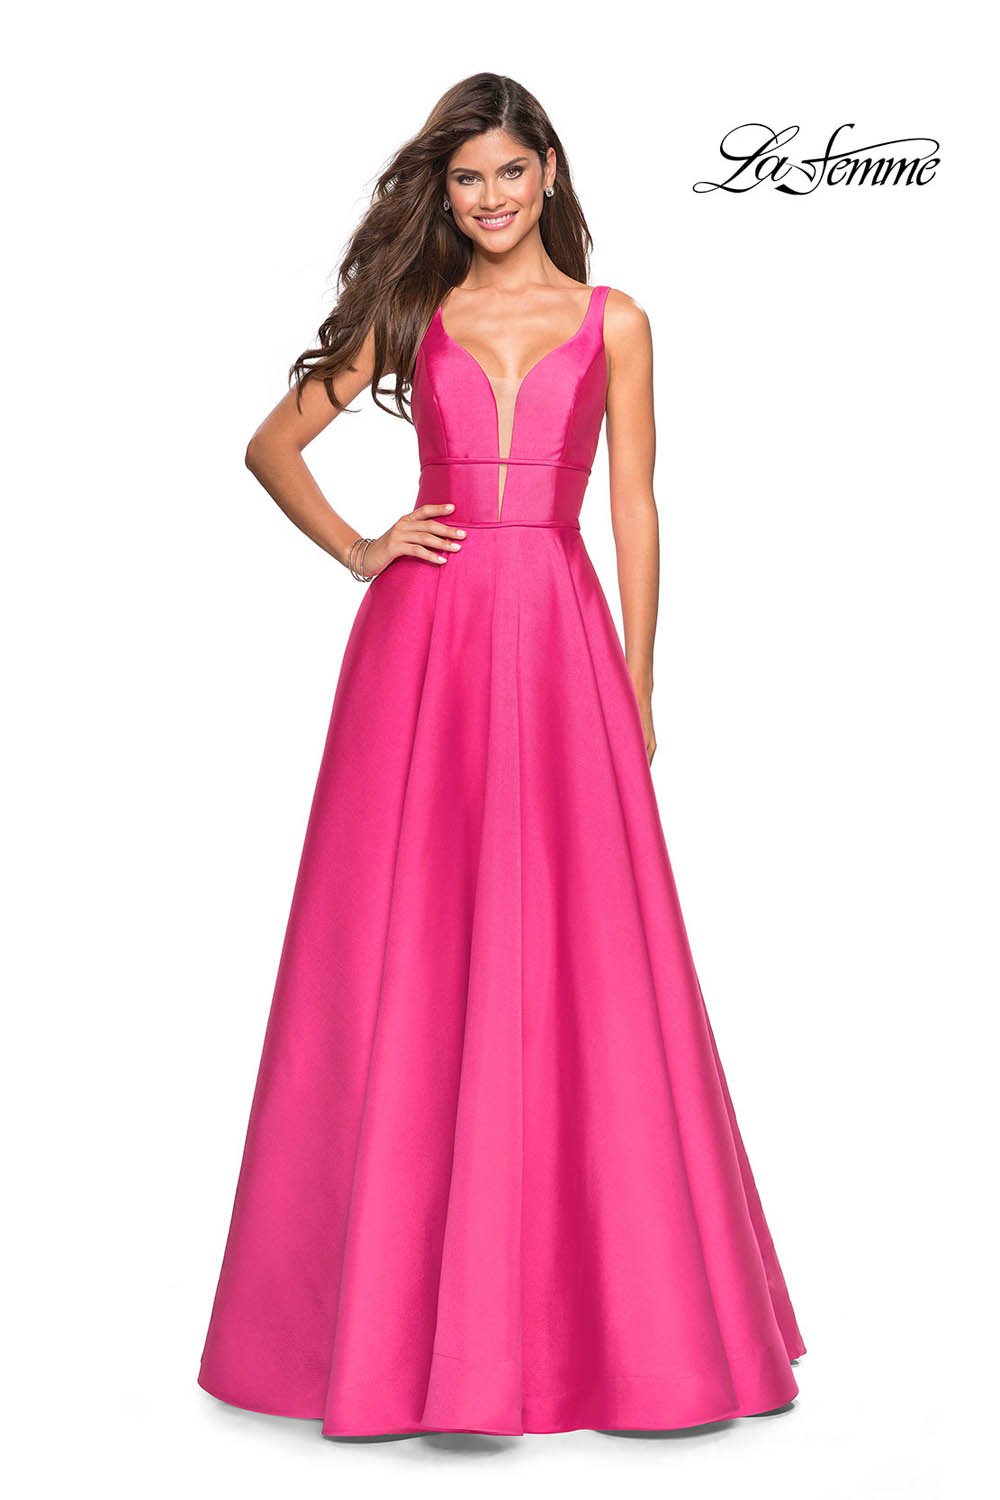 La Femme 26768 dress images in these colors: Bright Pink, Emerald, Pale Yellow, Sapphire Blue.